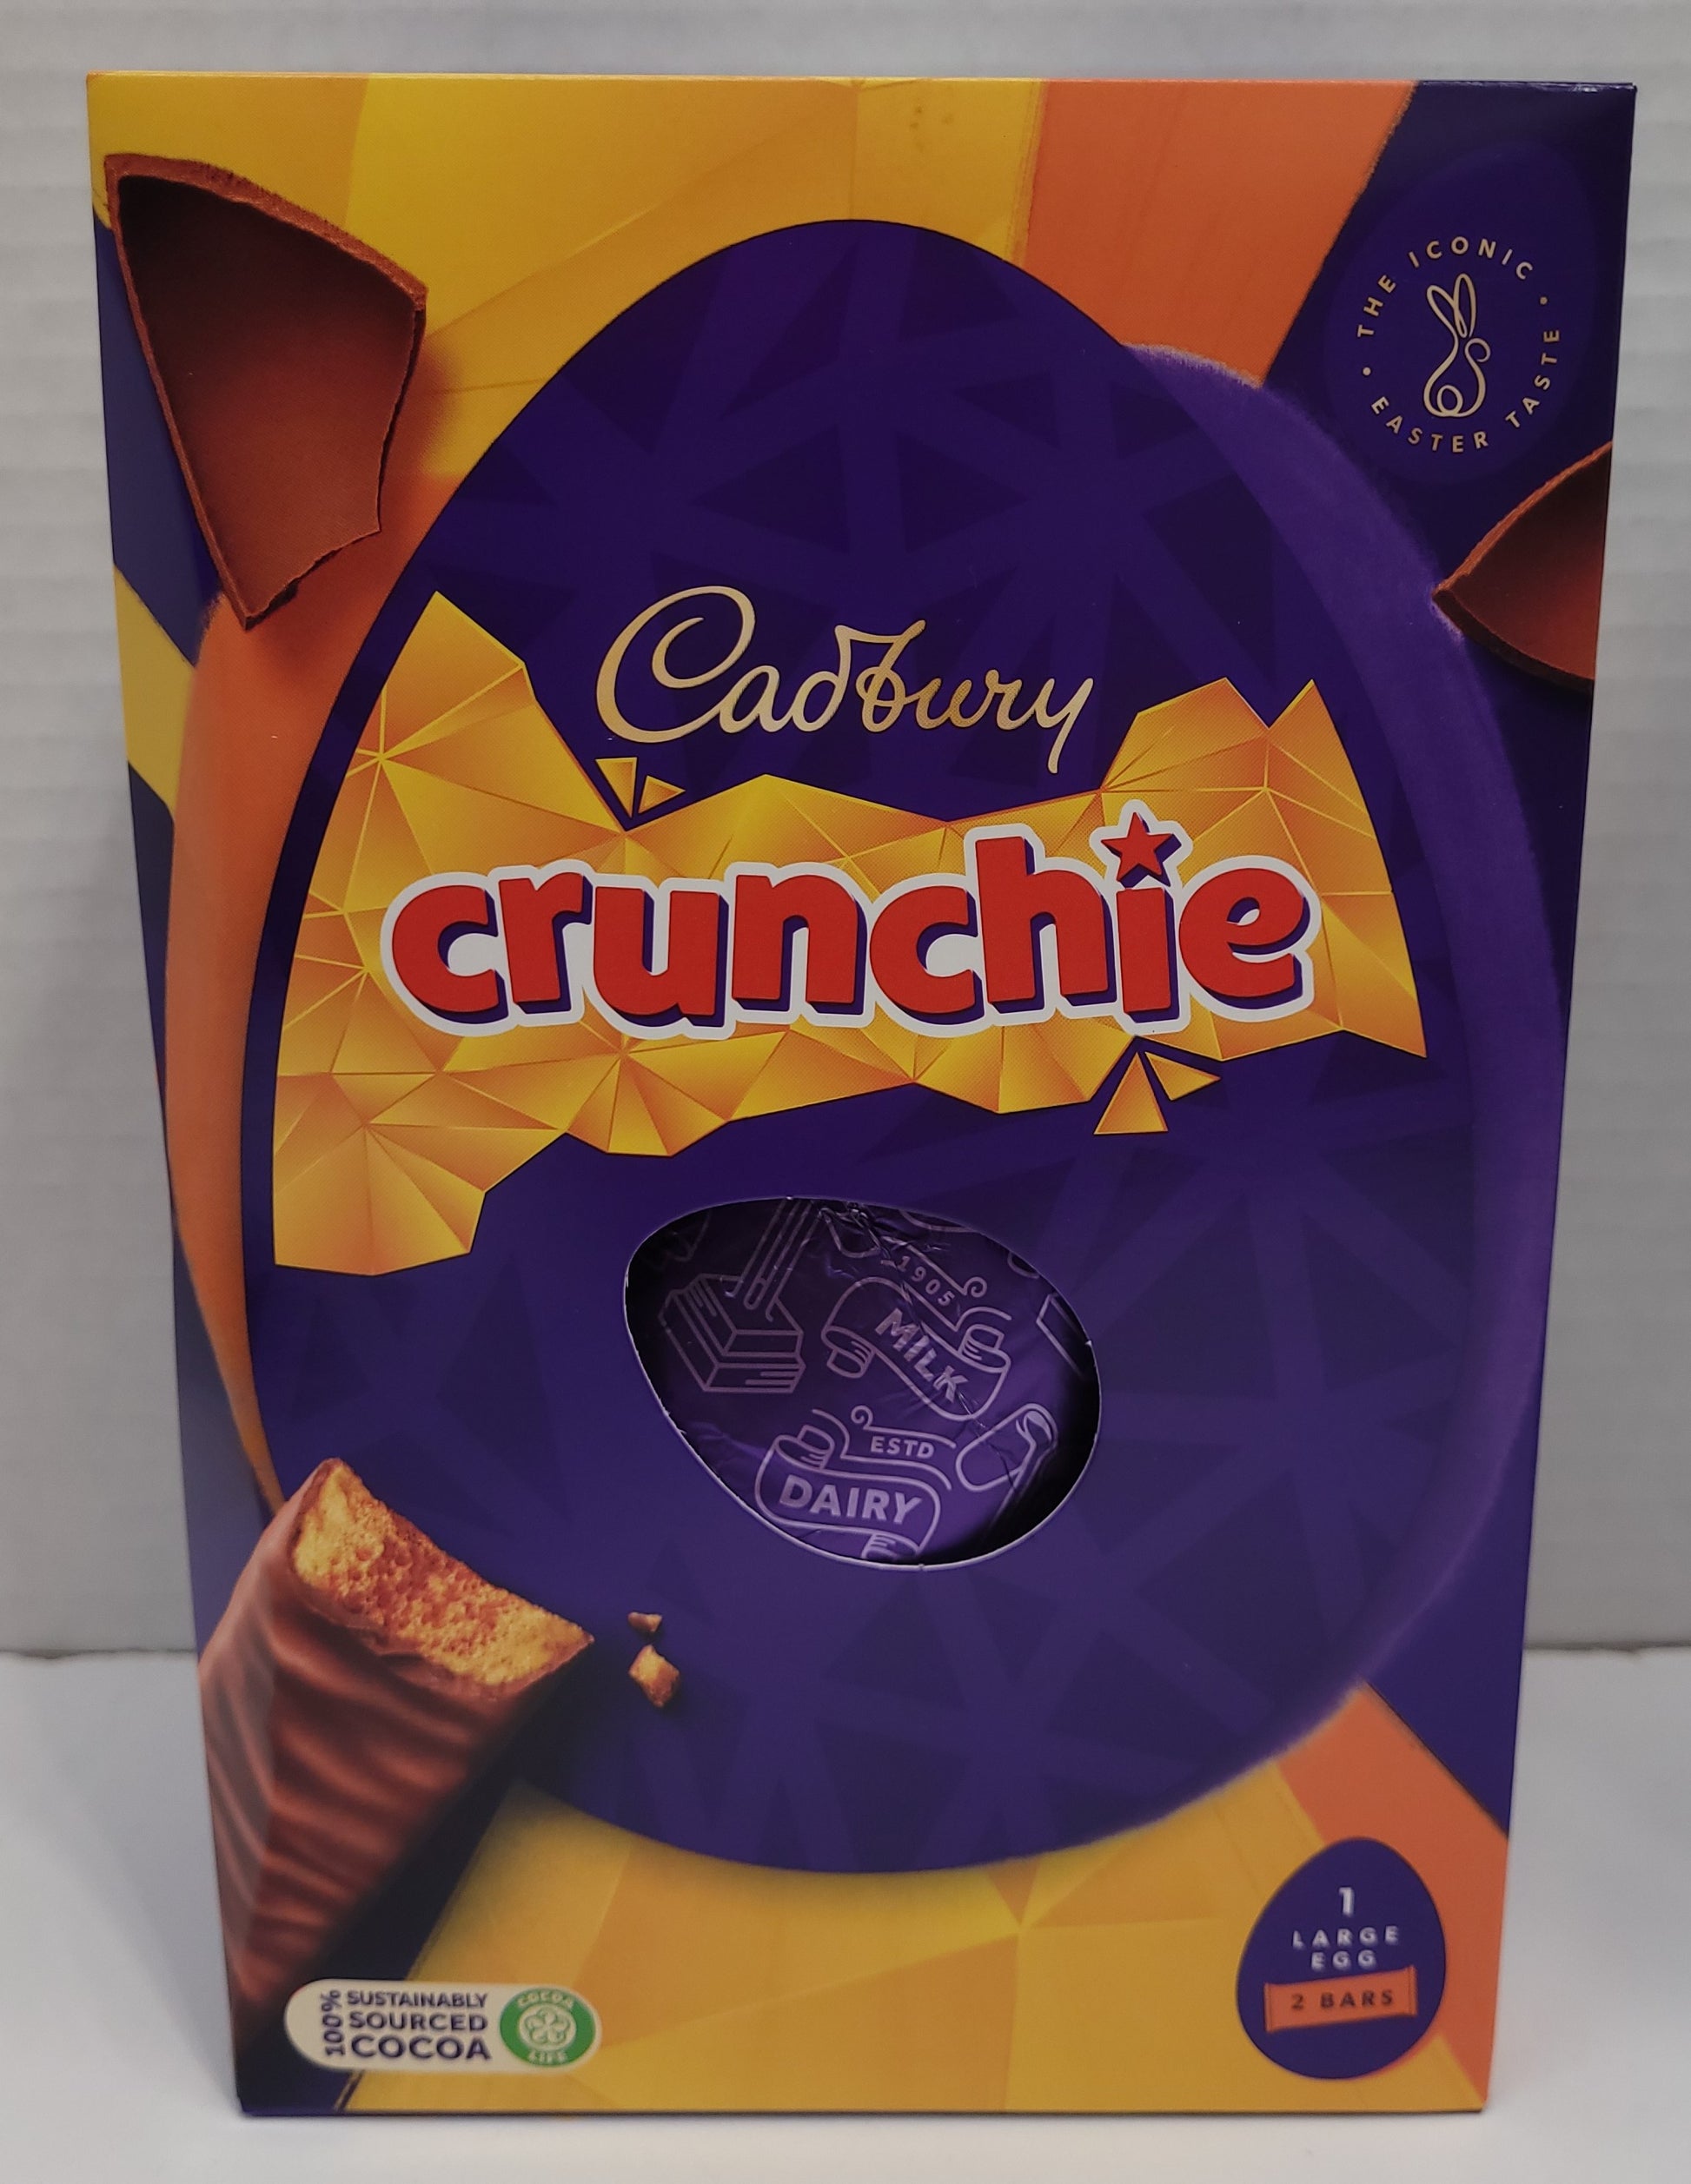 A hollow chocolate egg made with the world-famous Cadbury Dairy Milk chocolate and filled with two Cadbury Crunchie bars.   Bright festive packaging  perfect for the holiday!    Contents: One hollow chocolate egg and two bars of honeycombed milk chocolate.  Size: 190g.   Imported from the UK